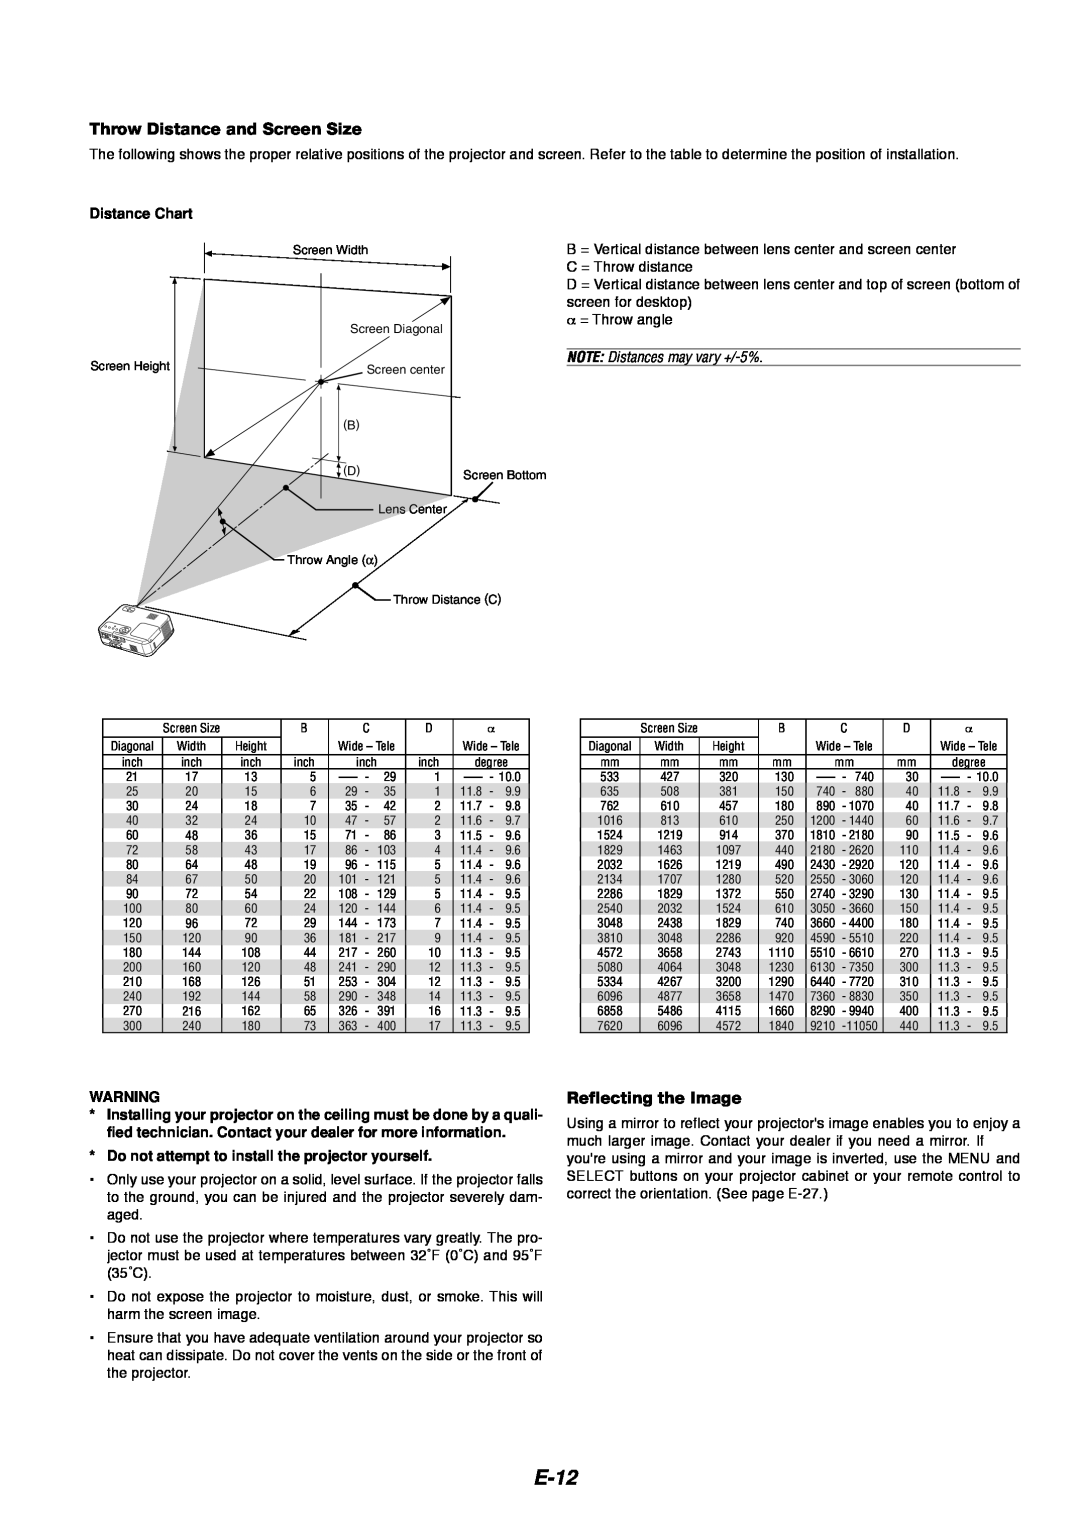 Dukane 8766 manual E-12, Throw Distance and Screen Size, Reflecting the Image, Distance Chart 